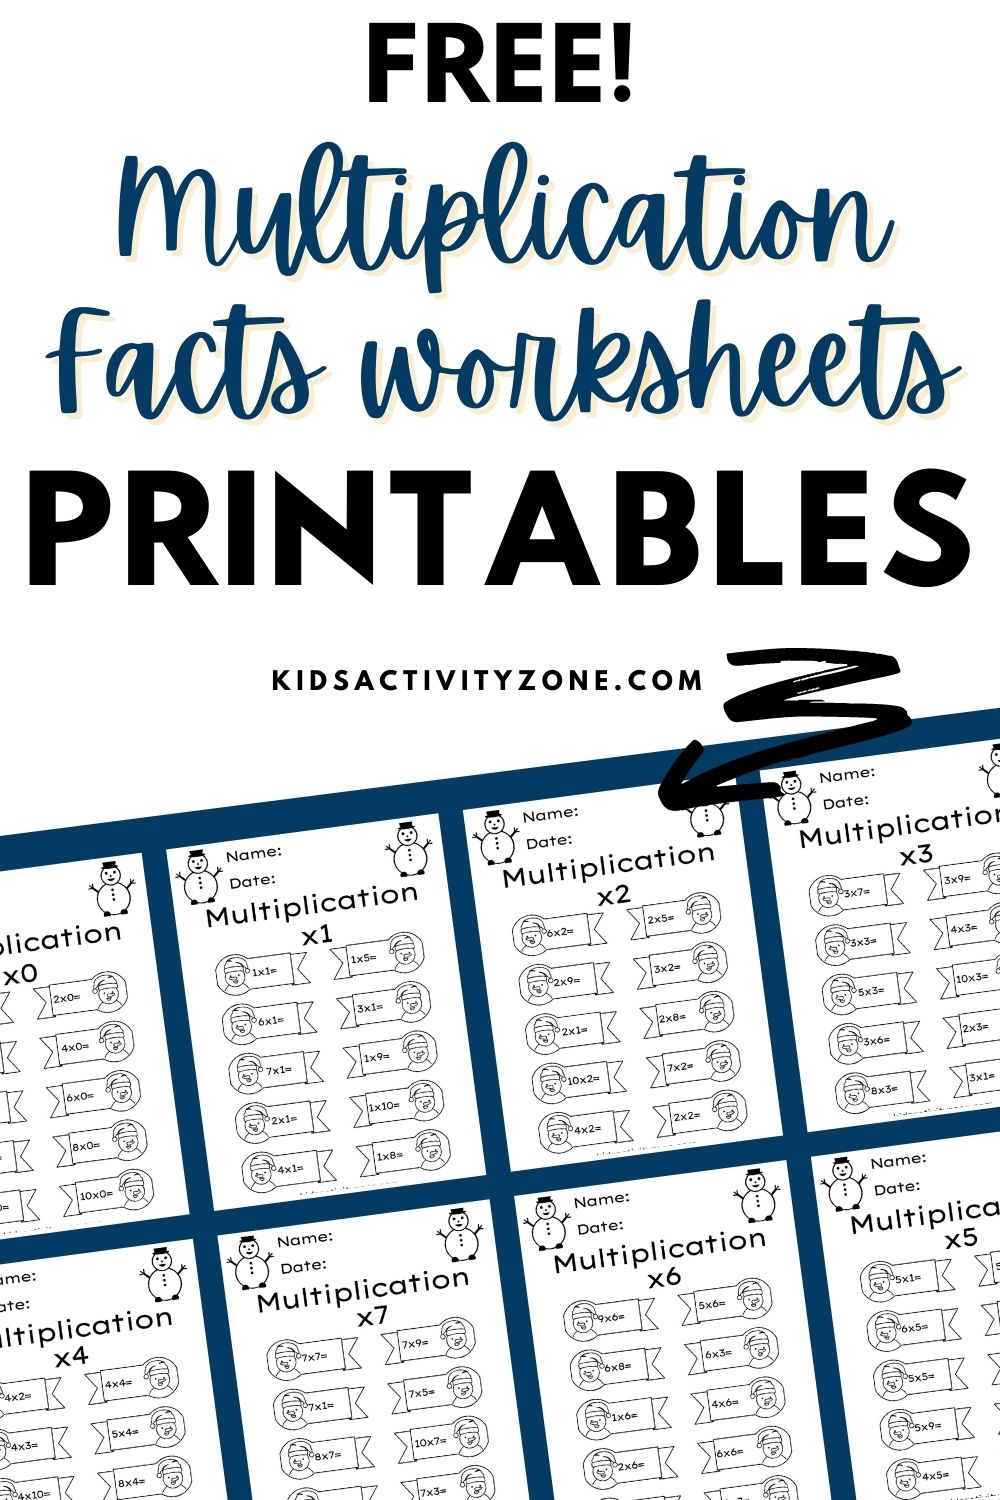 Multiplication Facts Worksheets are the perfect way to practice your multiplication math facts. Laminate them and reuse them until your child or student masters them all!